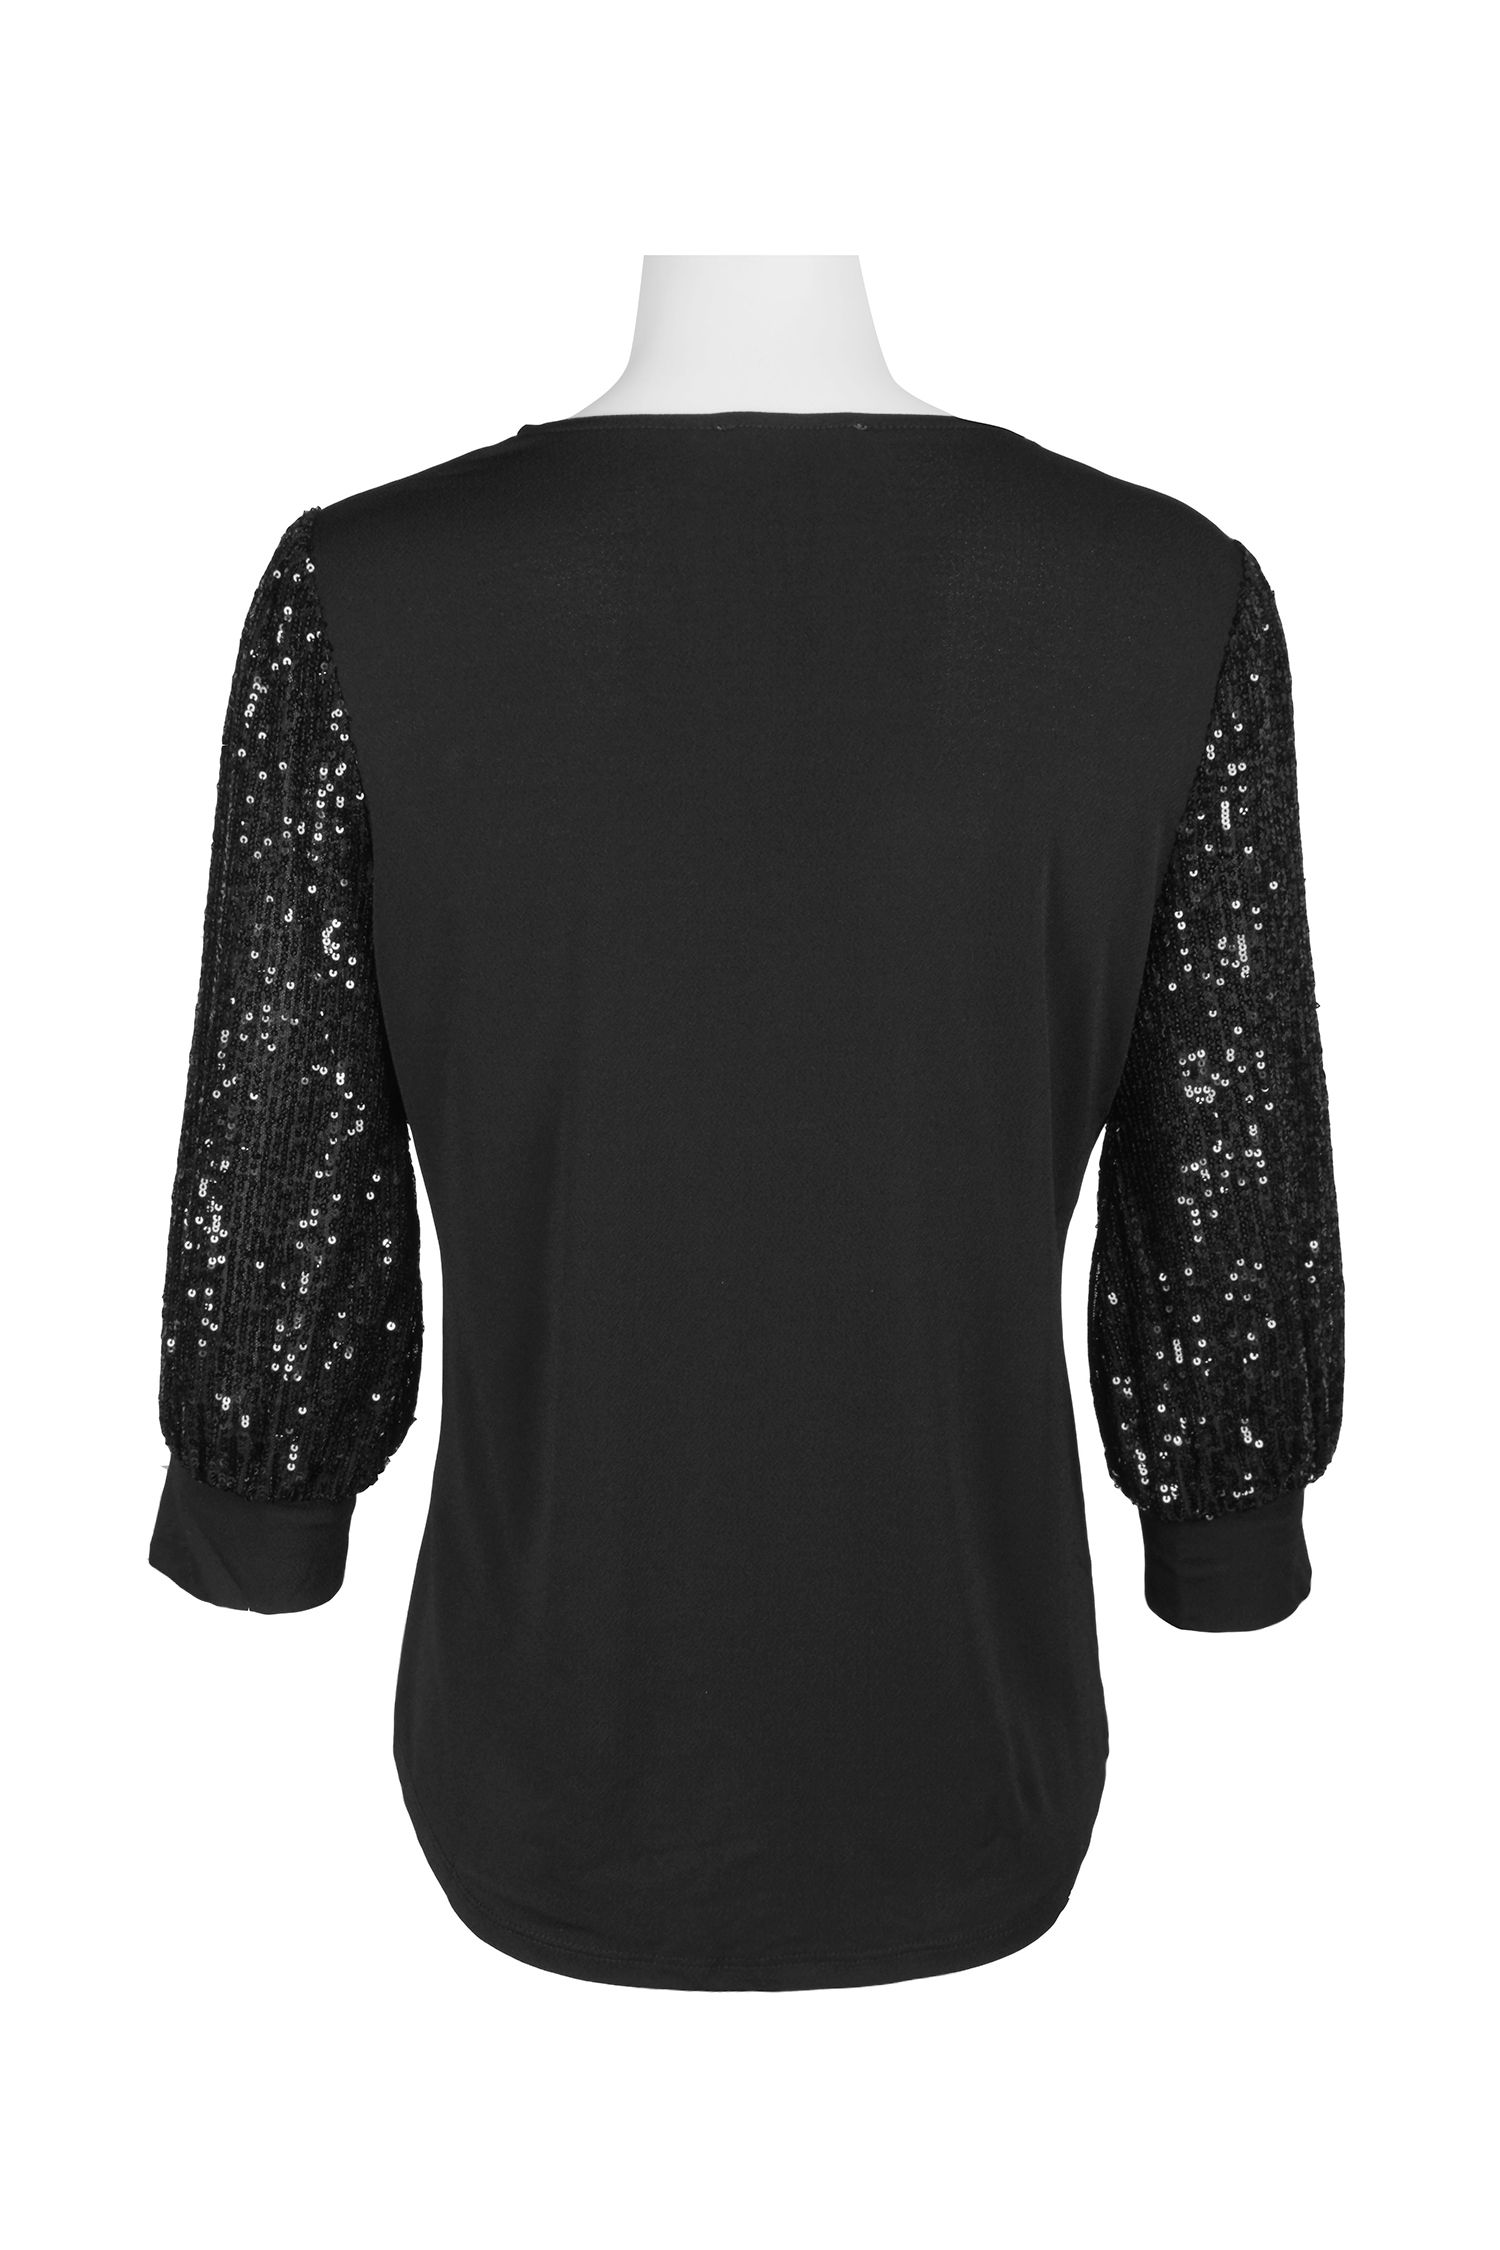 Adrianna Papell V-Neck Sequin ¾ Sleeve Solid Knit Mos Crepe Top ...